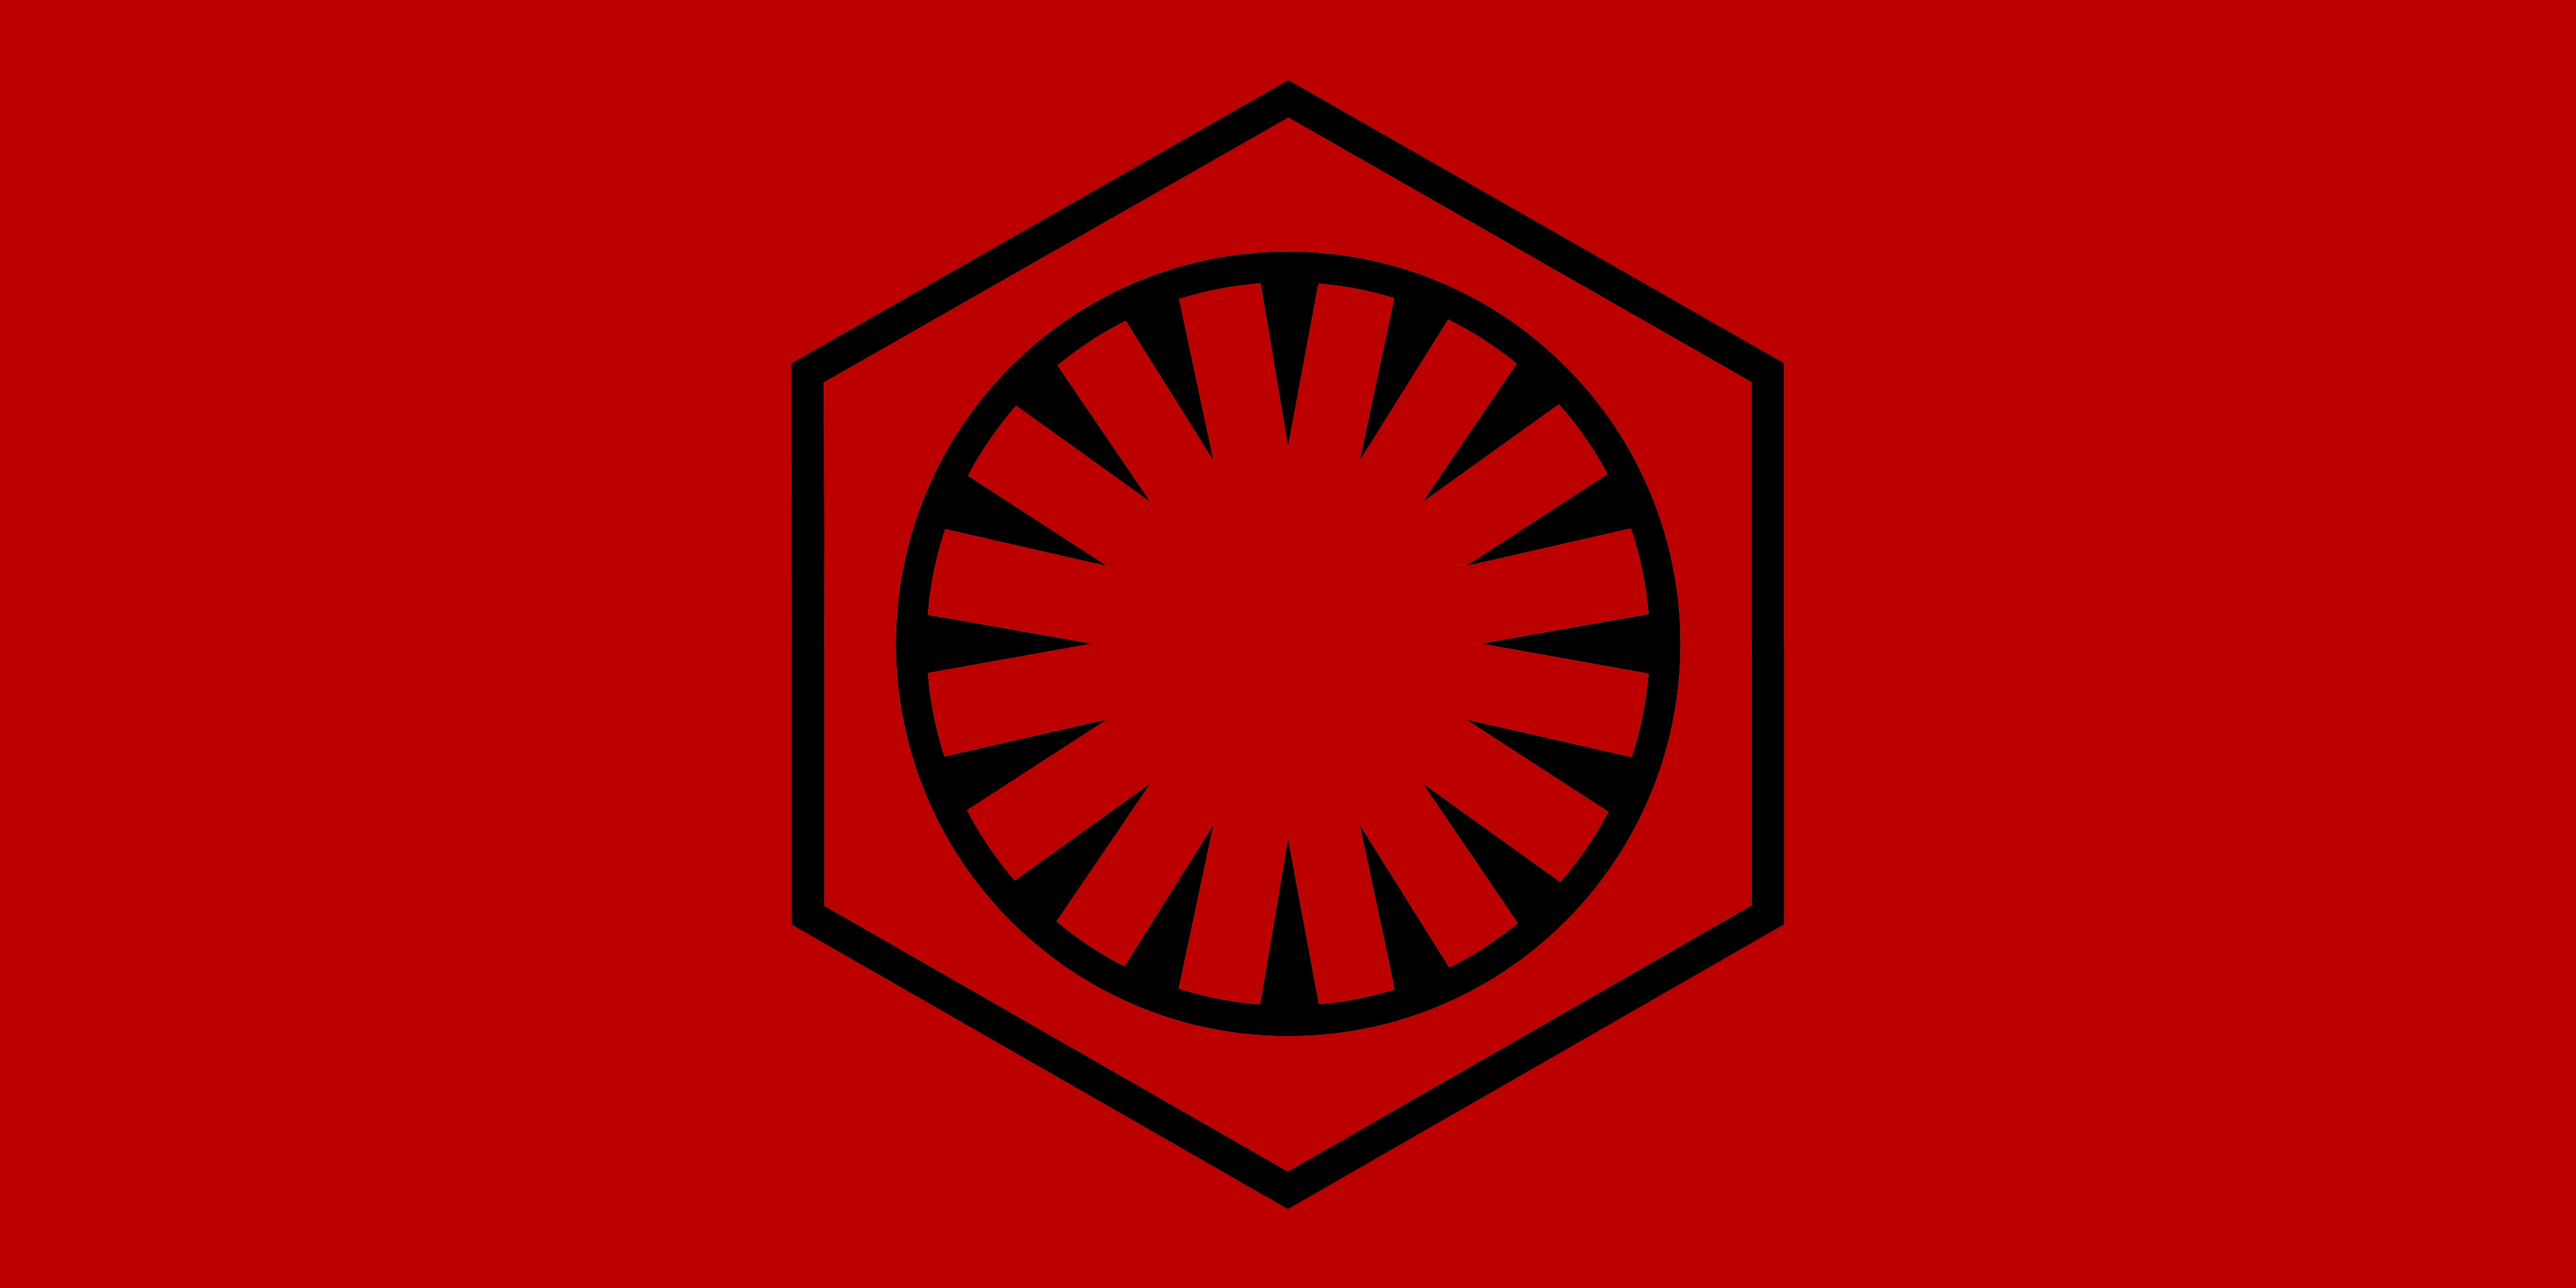 Flag Of The First Order Star Wars Vii By Redrich1917